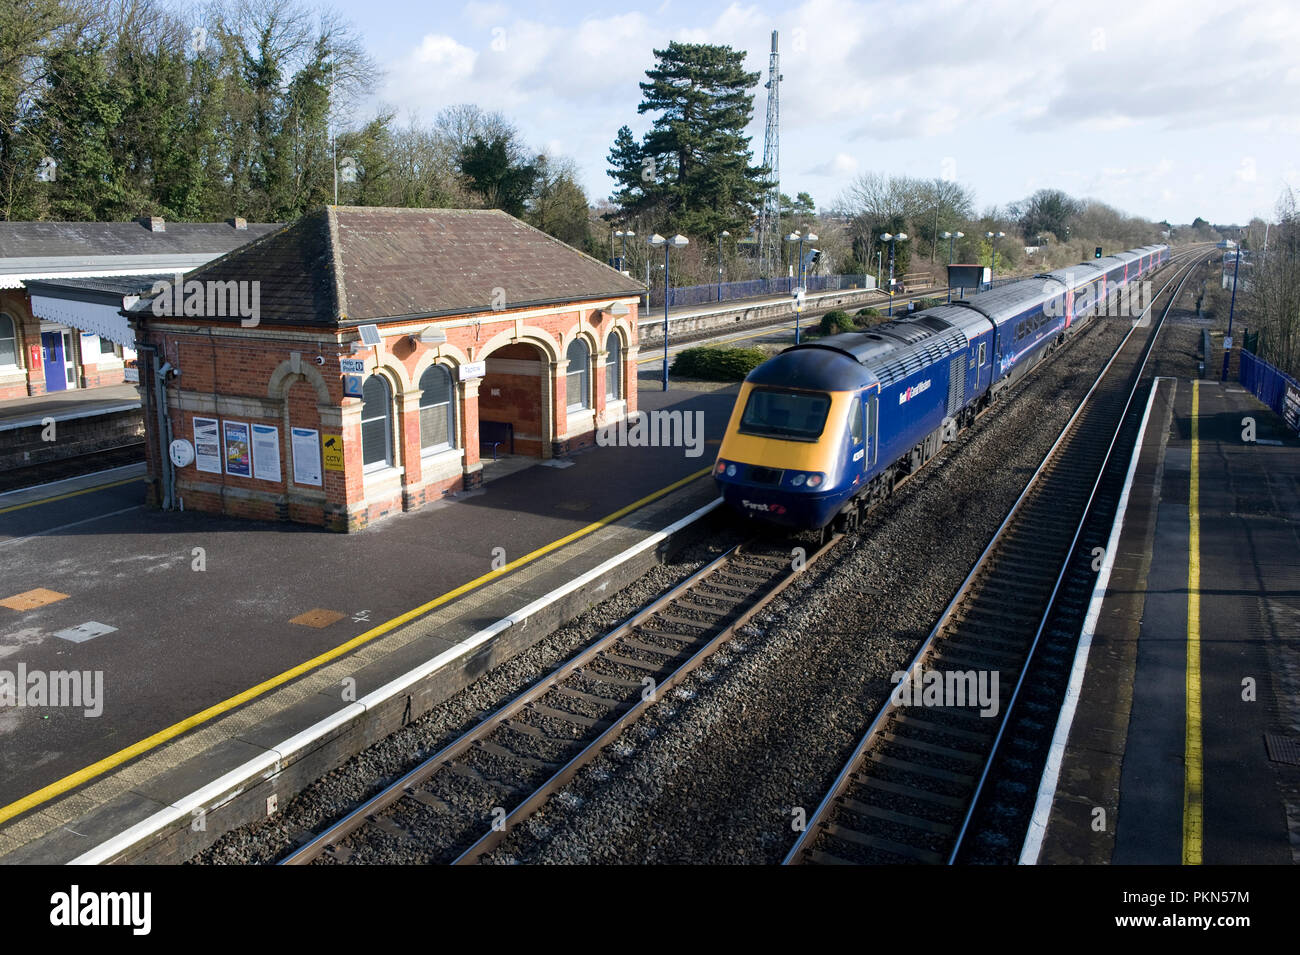 Taplow train station, served by local services by First Great Western (FGW). It is the closest railway station to the Dorney Rowing Lake Stock Photo